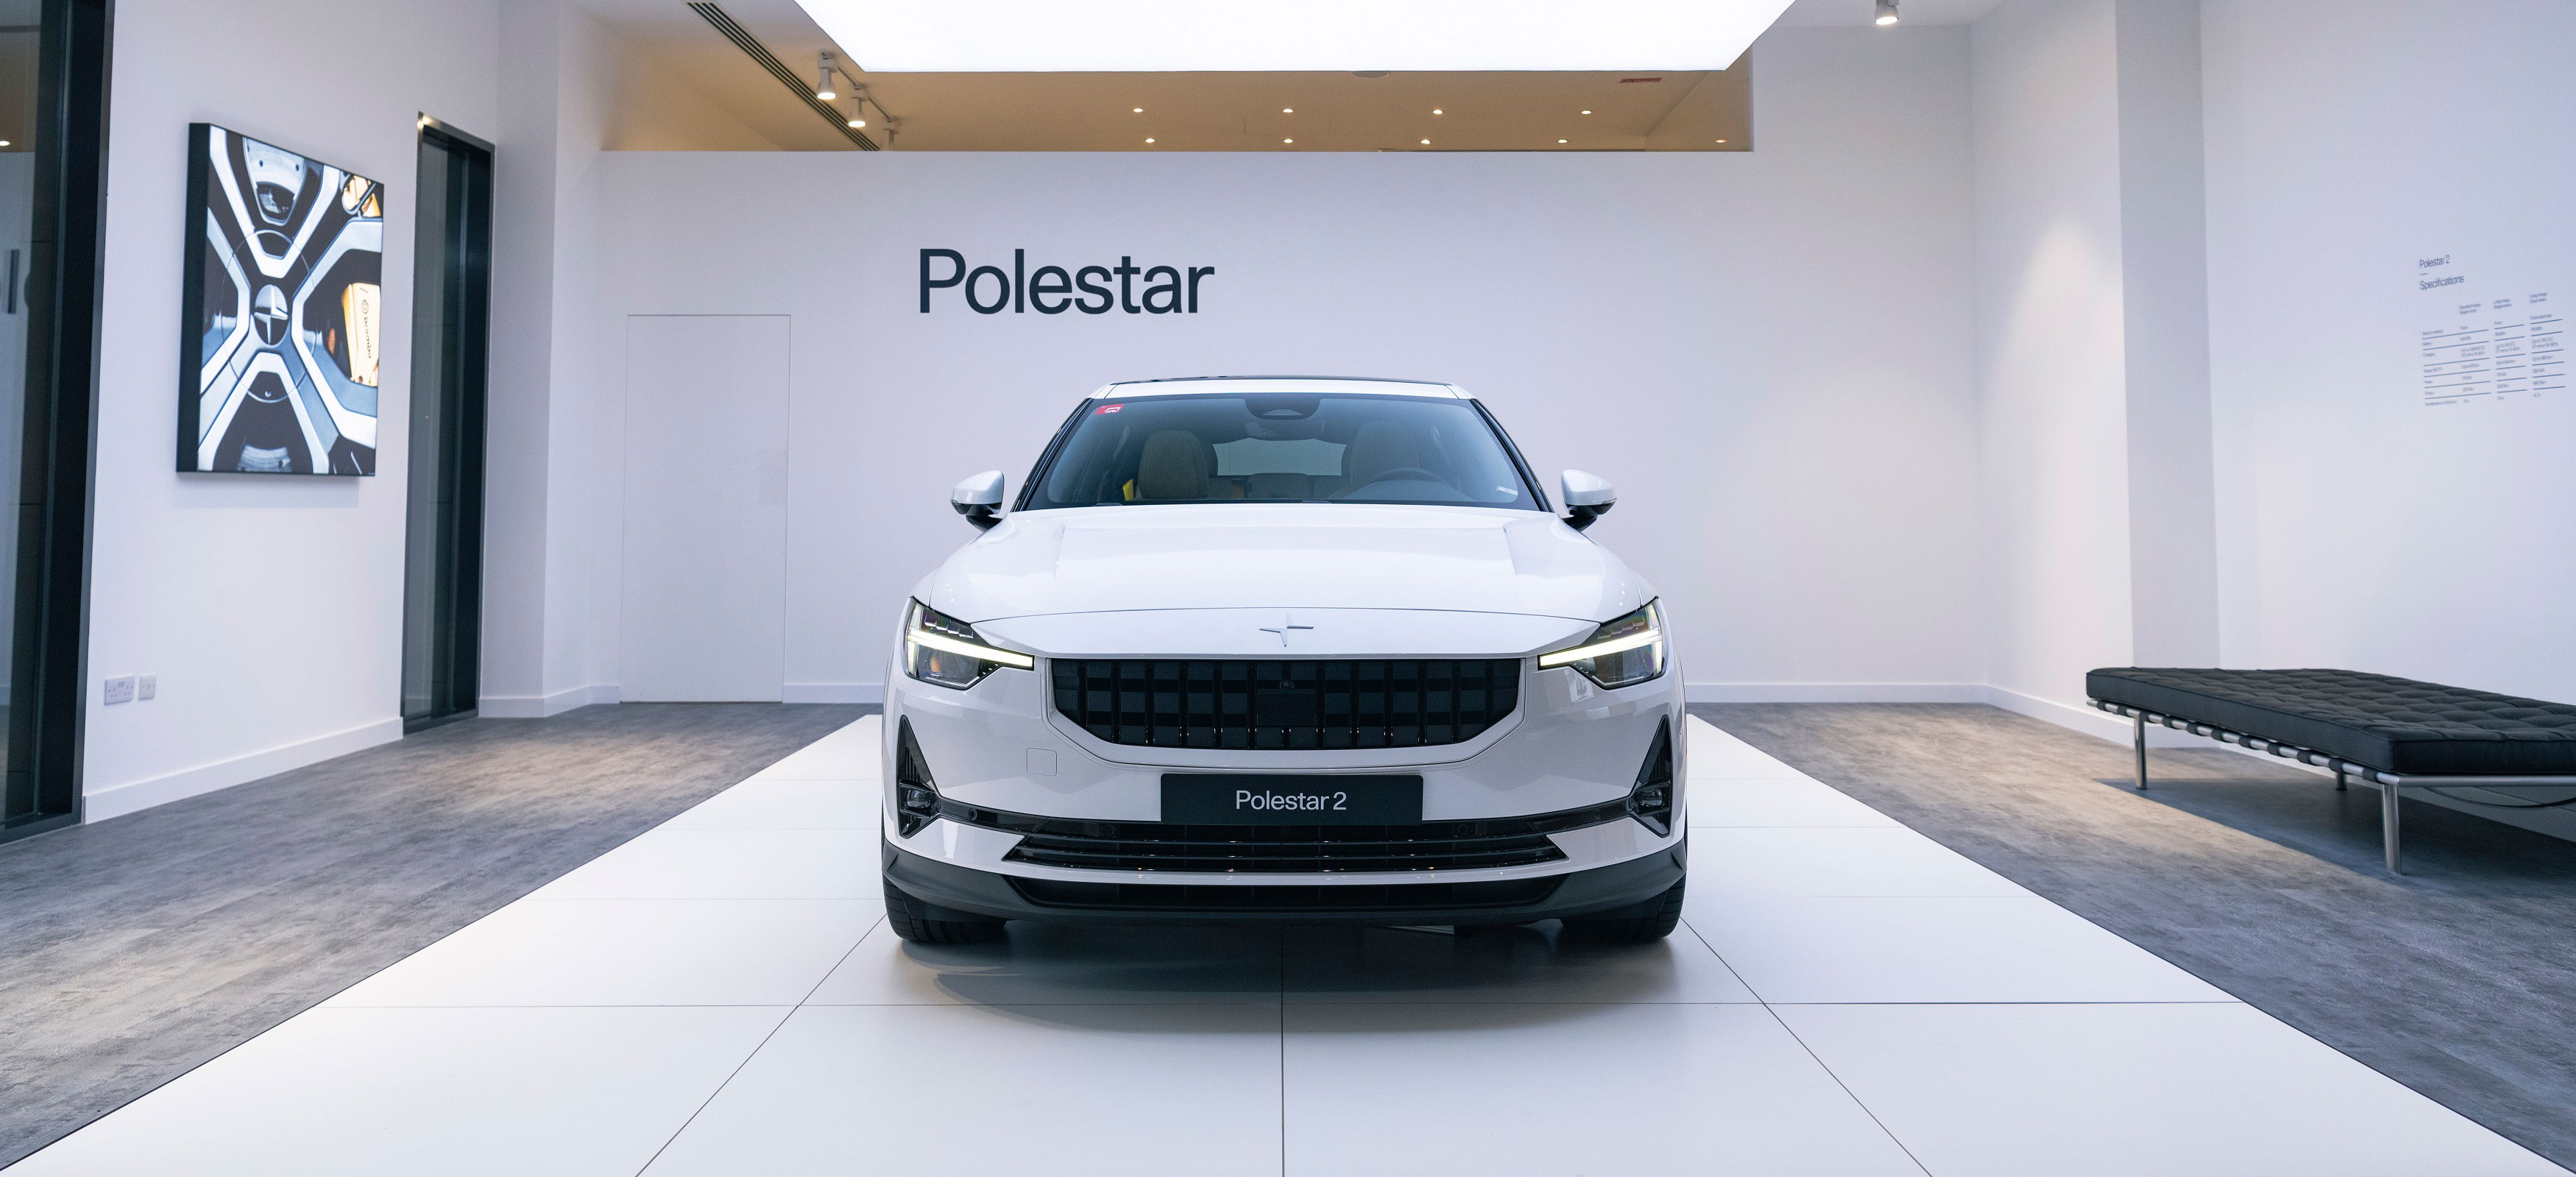 Polestar 2 pricing confirmed for UAE with ‘pop-up’ Polestar Space debut in City Walk